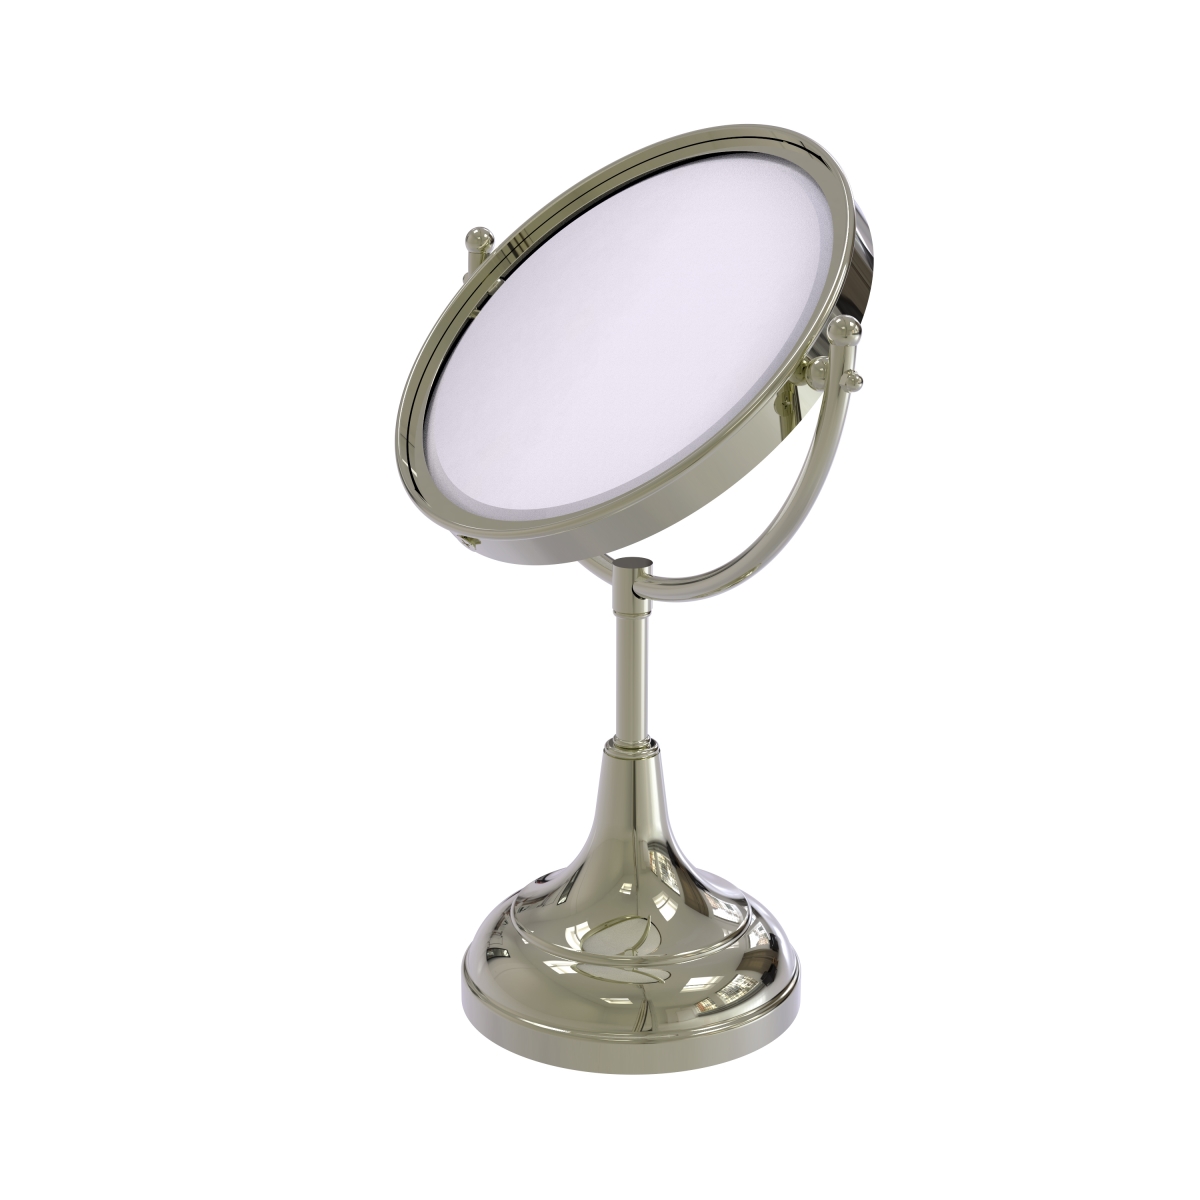 DM-2-3X-PNI 8 in. Vanity Top Make-Up Mirror 3X Magnification, Polished Nickel - 15 x 8 x 8 in -  Allied Brass, DM-2/3X-PNI